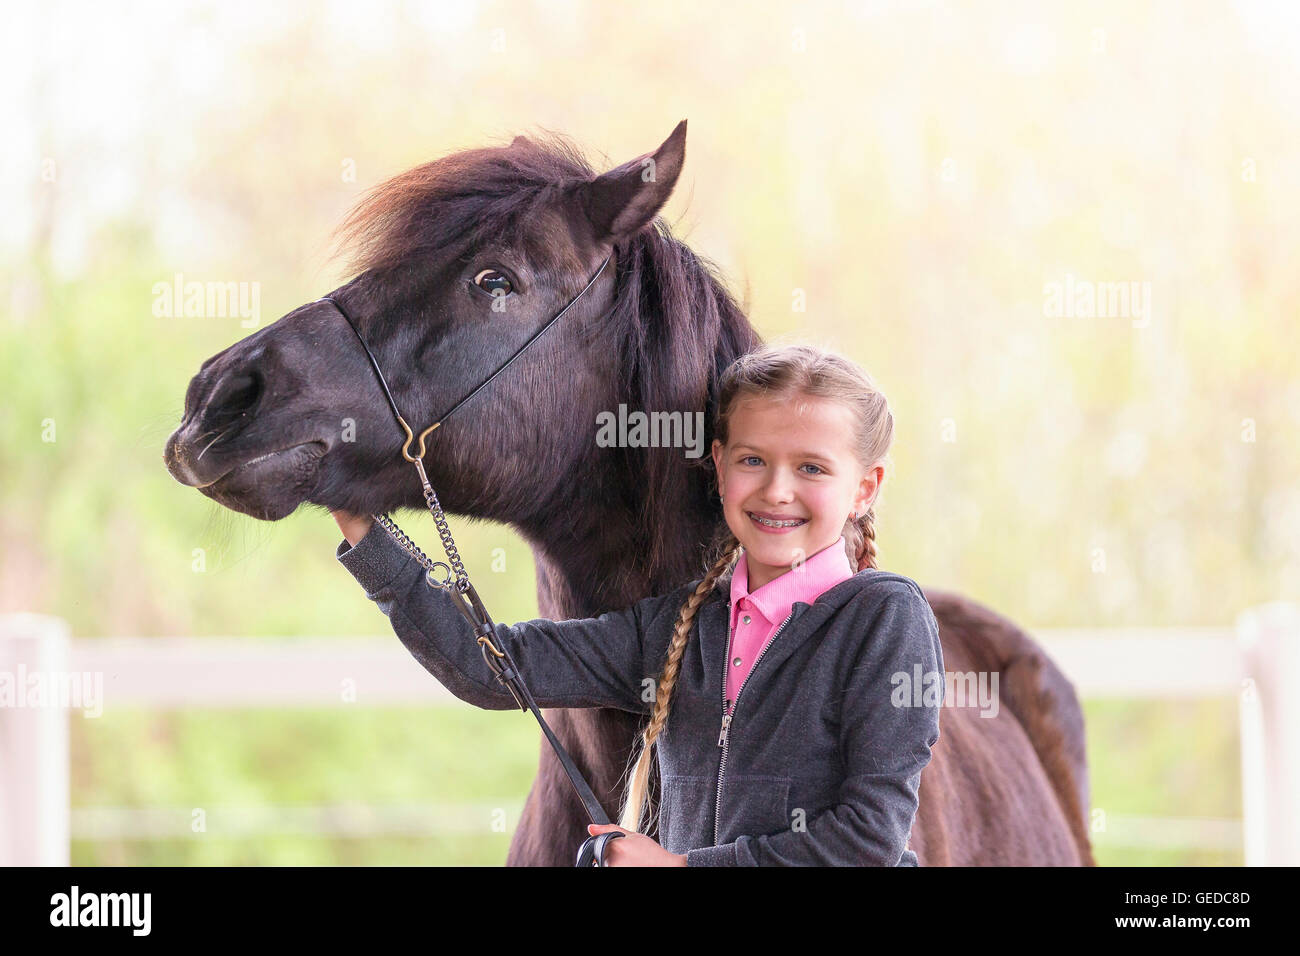 Shetland Pony. Child in riding dress standing next to bay adult. Germany Stock Photo